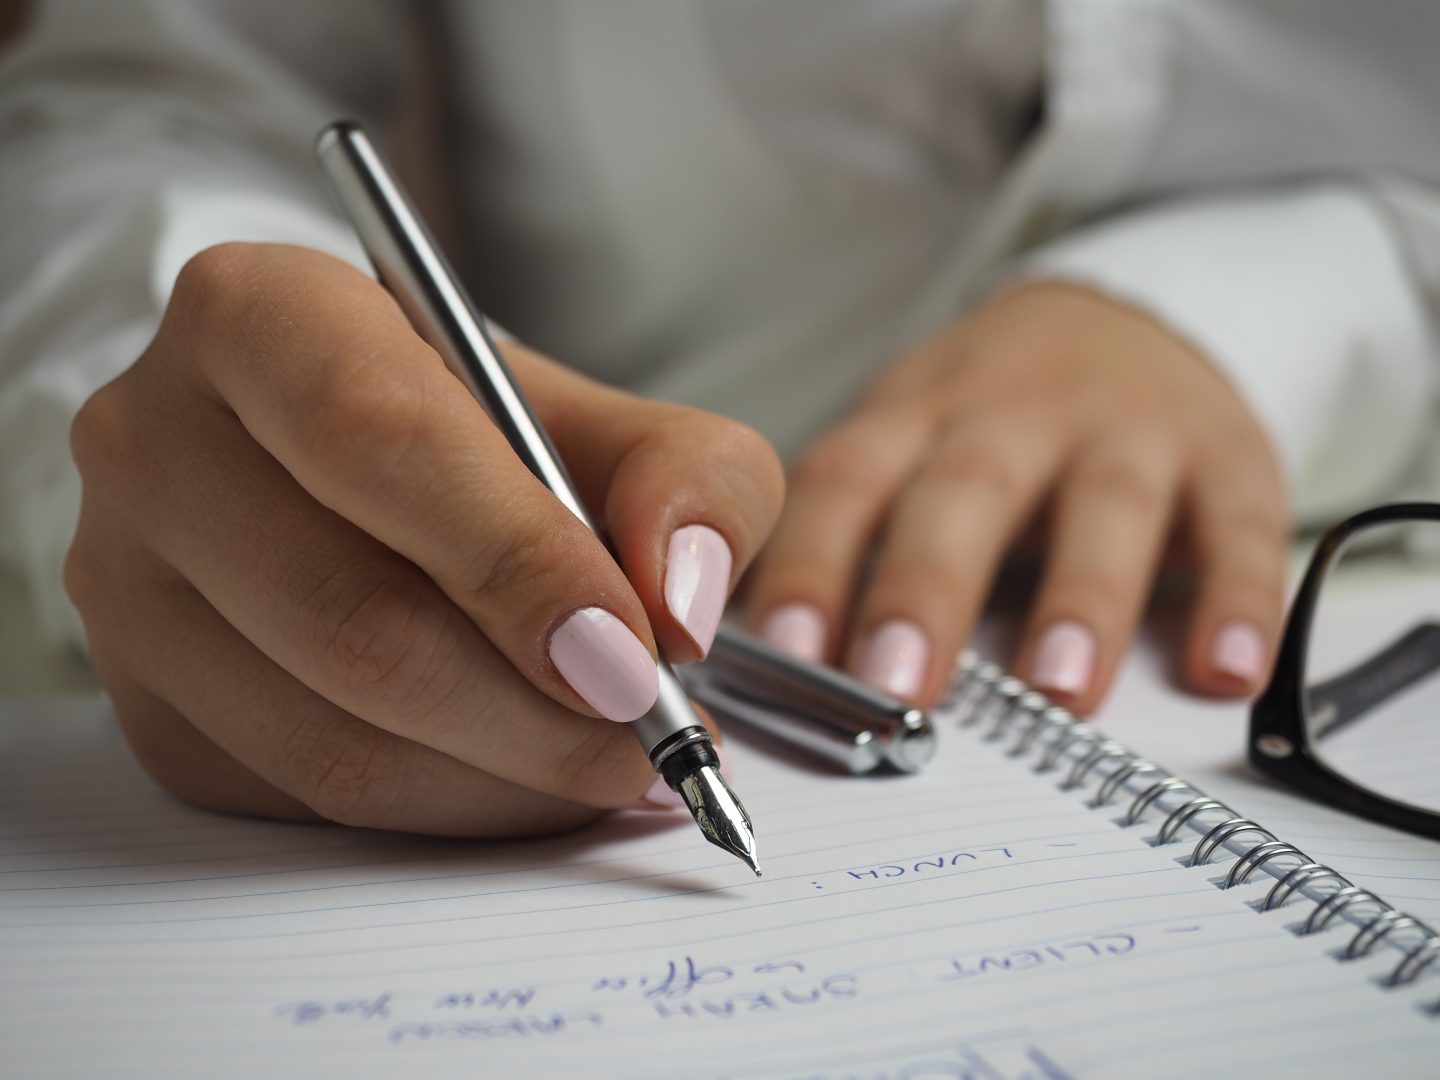 Woman with beautifully manicured healthy nails and pink nail polish, writing with a pen. 